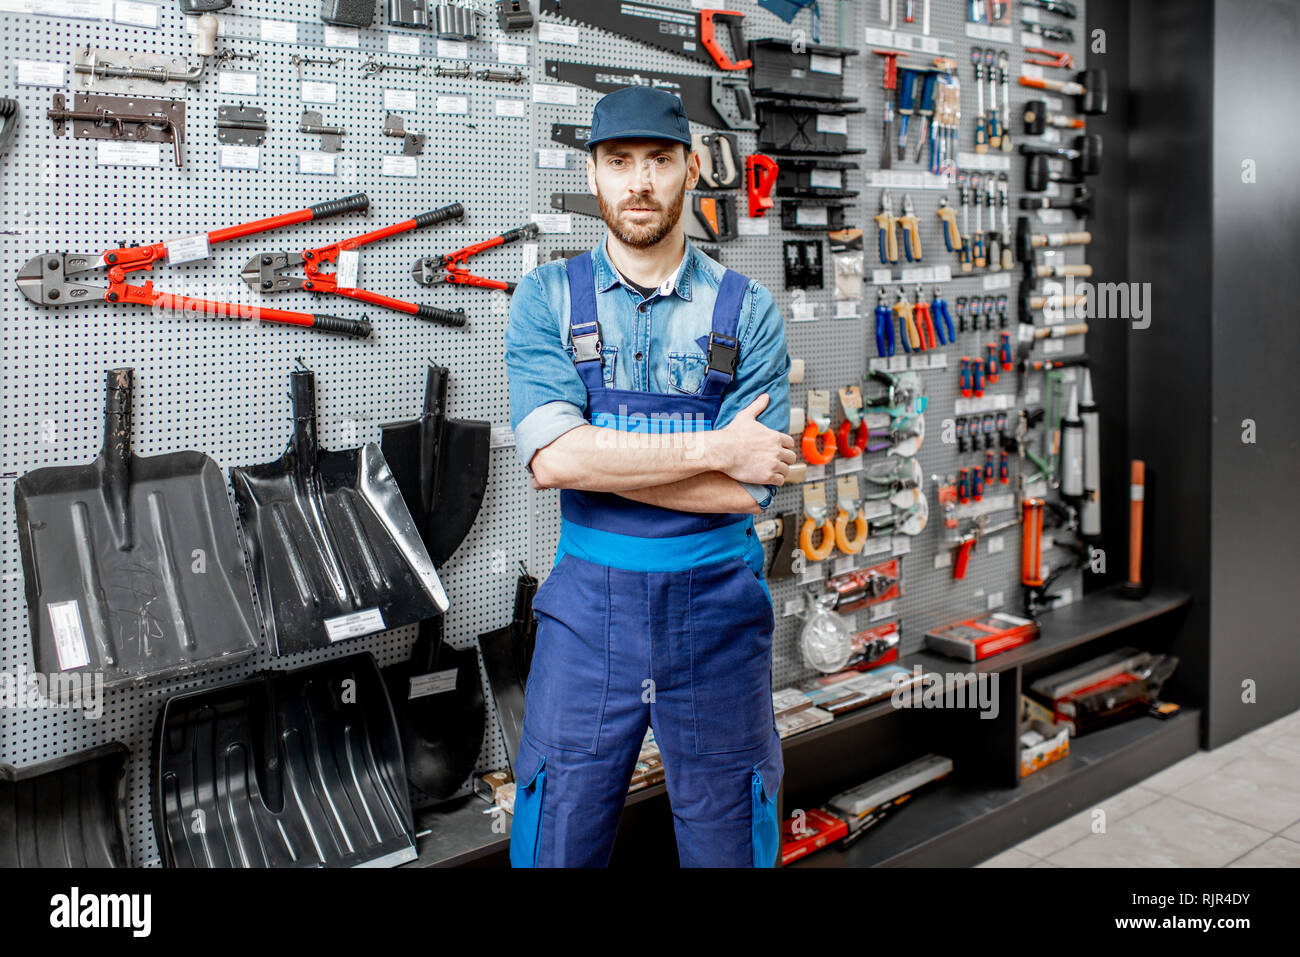 Portrait of a handsome worker in uniform standing in the shop with garden equipment on the background Stock Photo